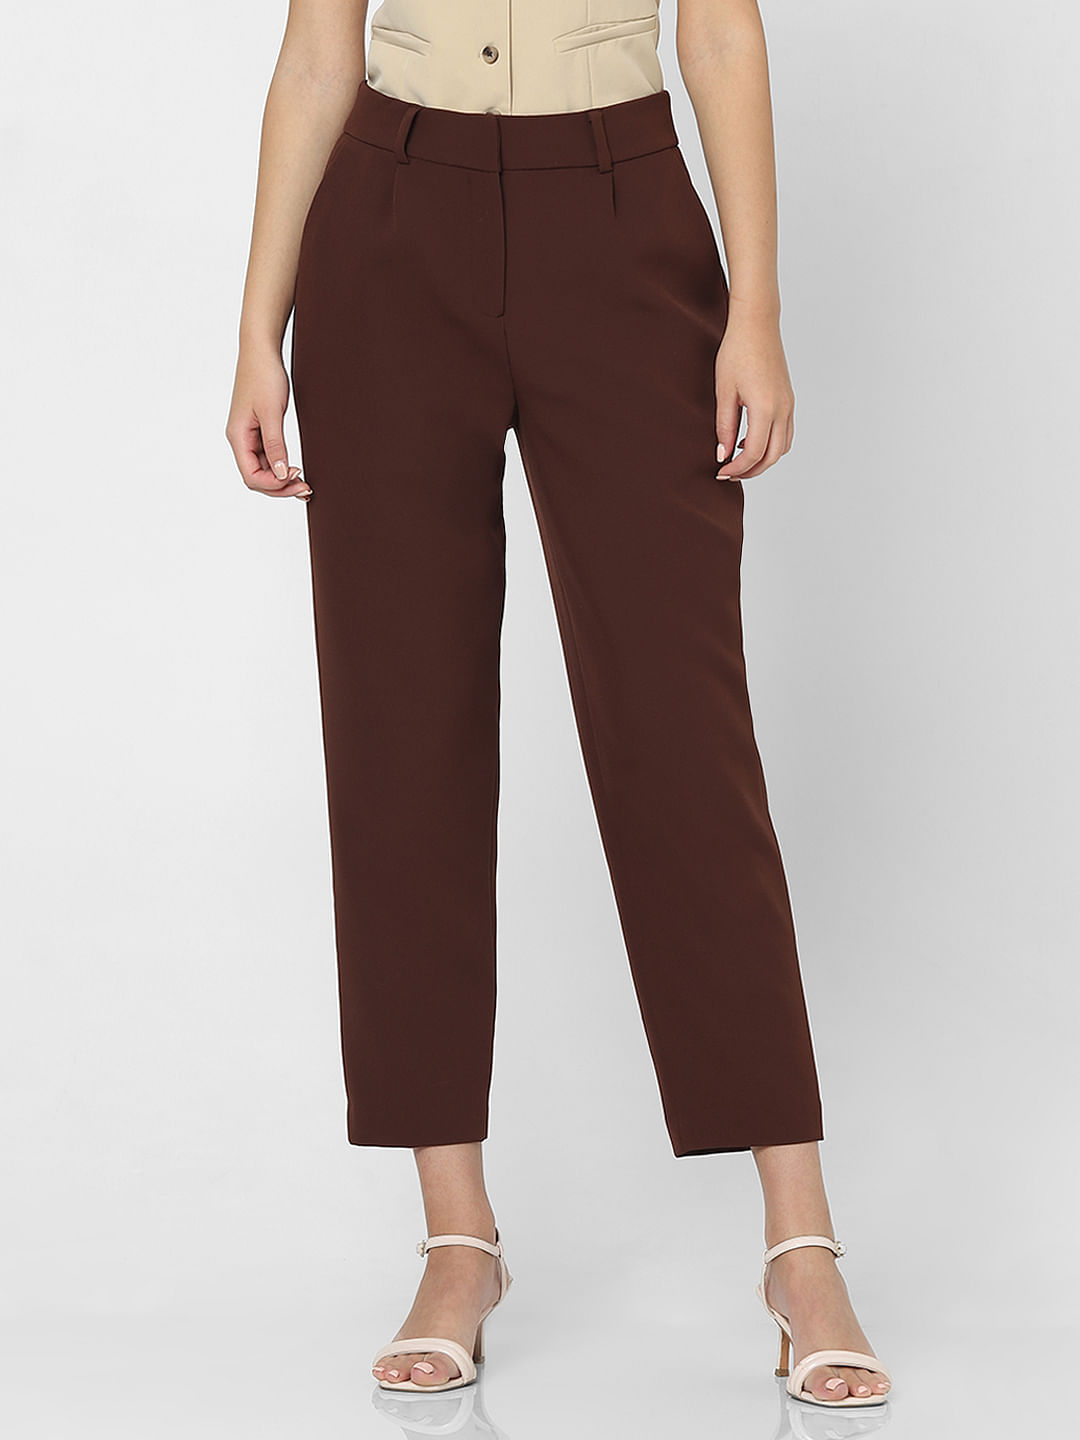 Buy NAARI Brown Cotton Slim Fit Embroidered Cigarette Trousers for Women's  at Amazon.in